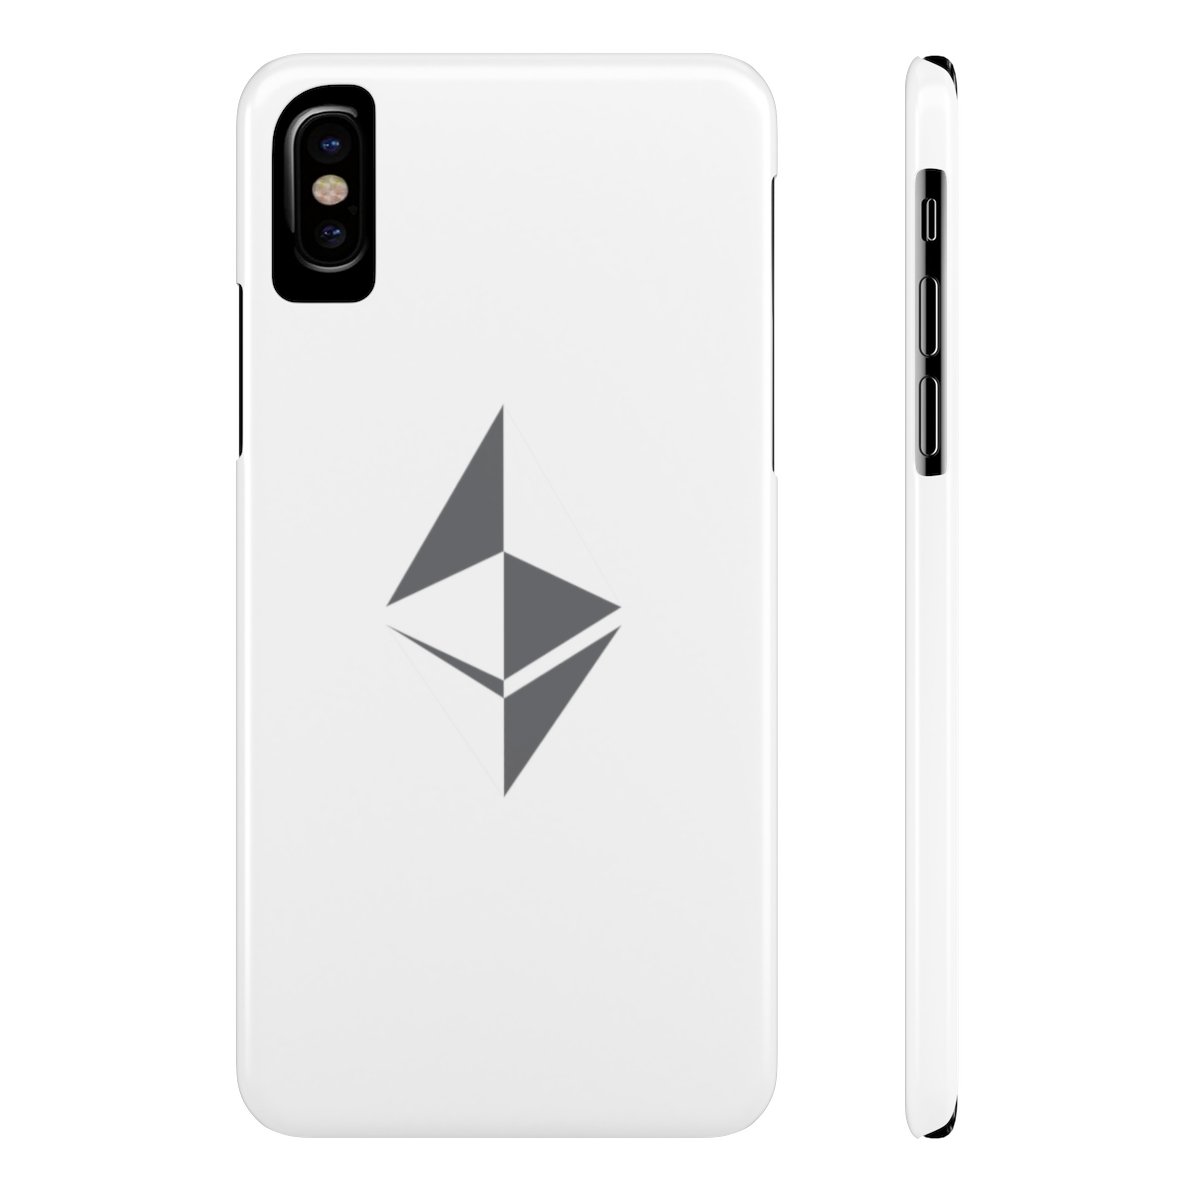 Ethereum surface design - Case Mate Slim Phone Cases TCP1607 iPhone X Slim Official Crypto  Merch